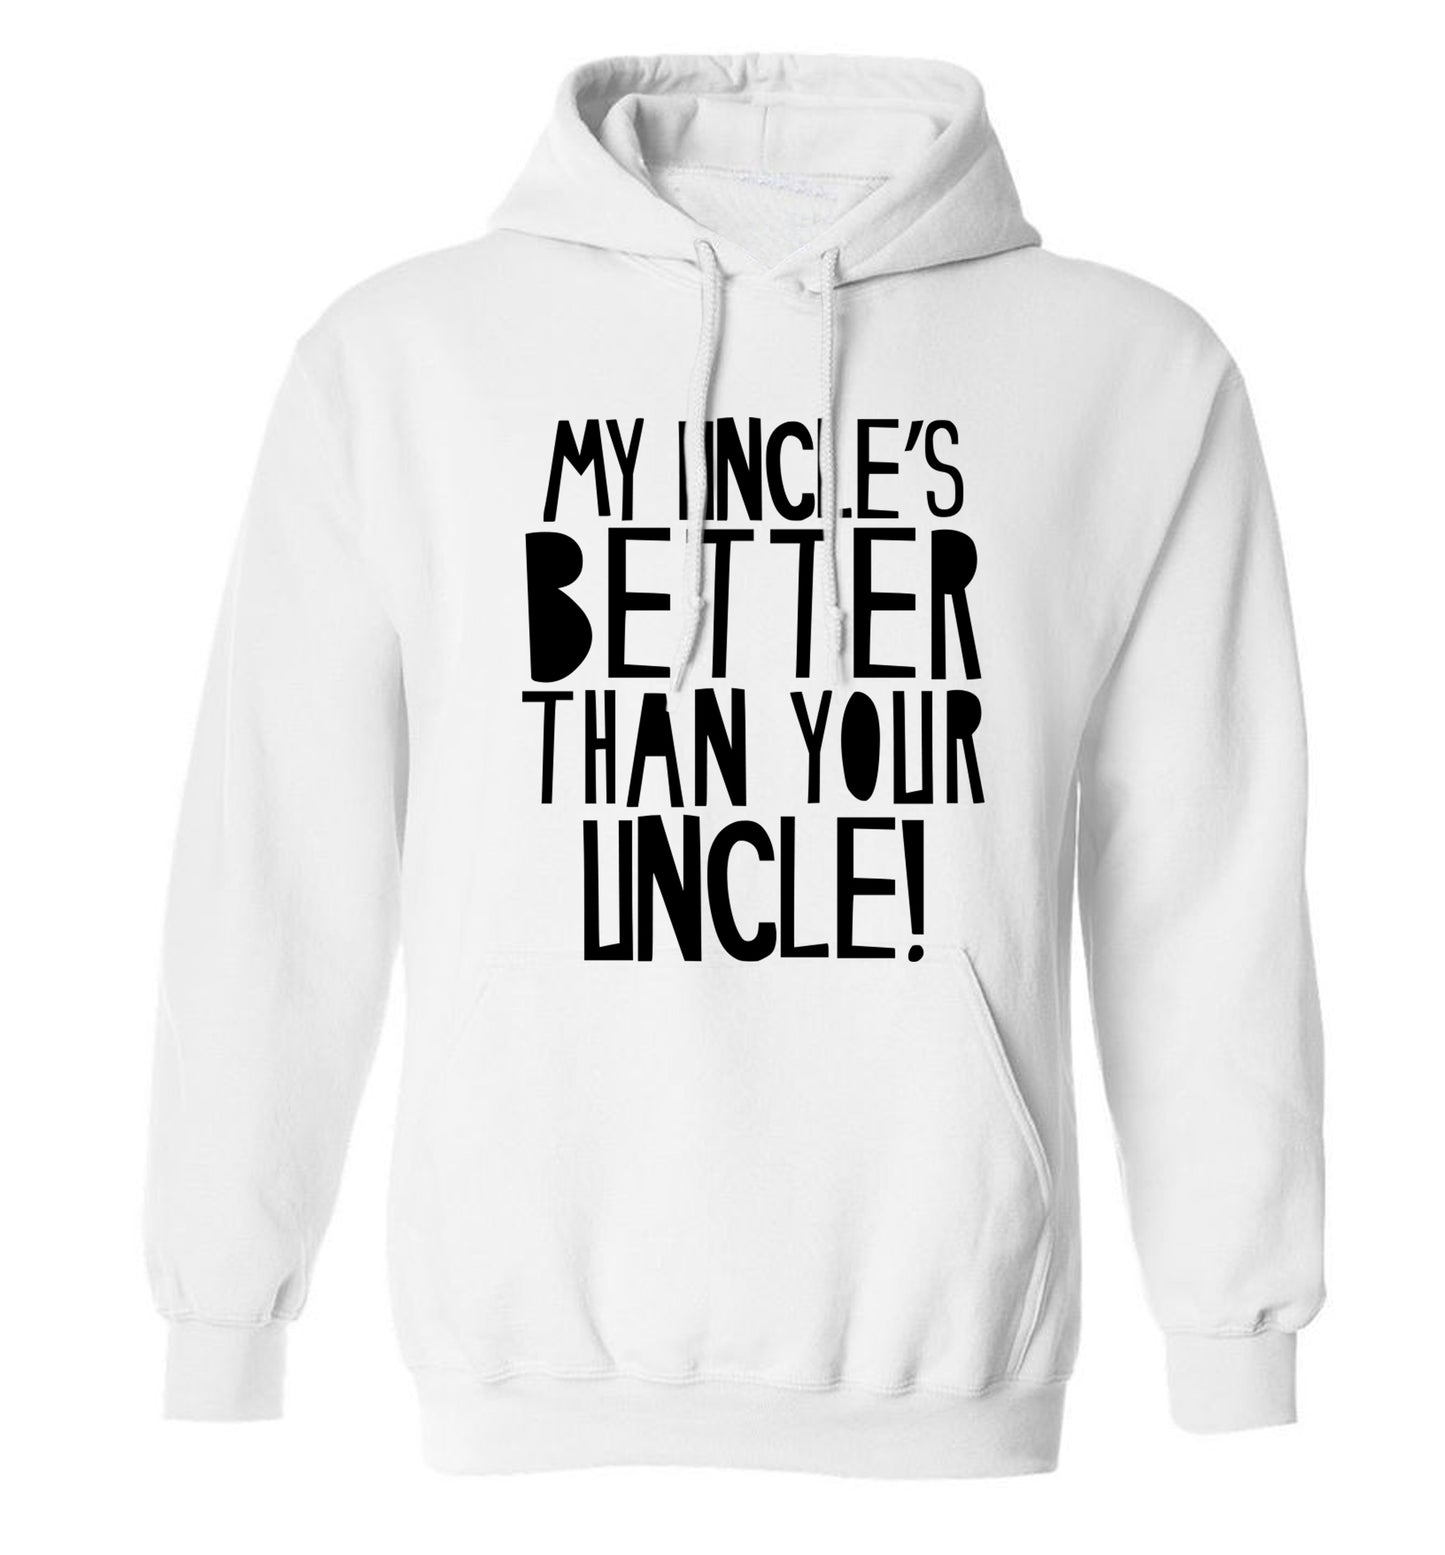 My uncles better than your uncle adults unisex white hoodie 2XL